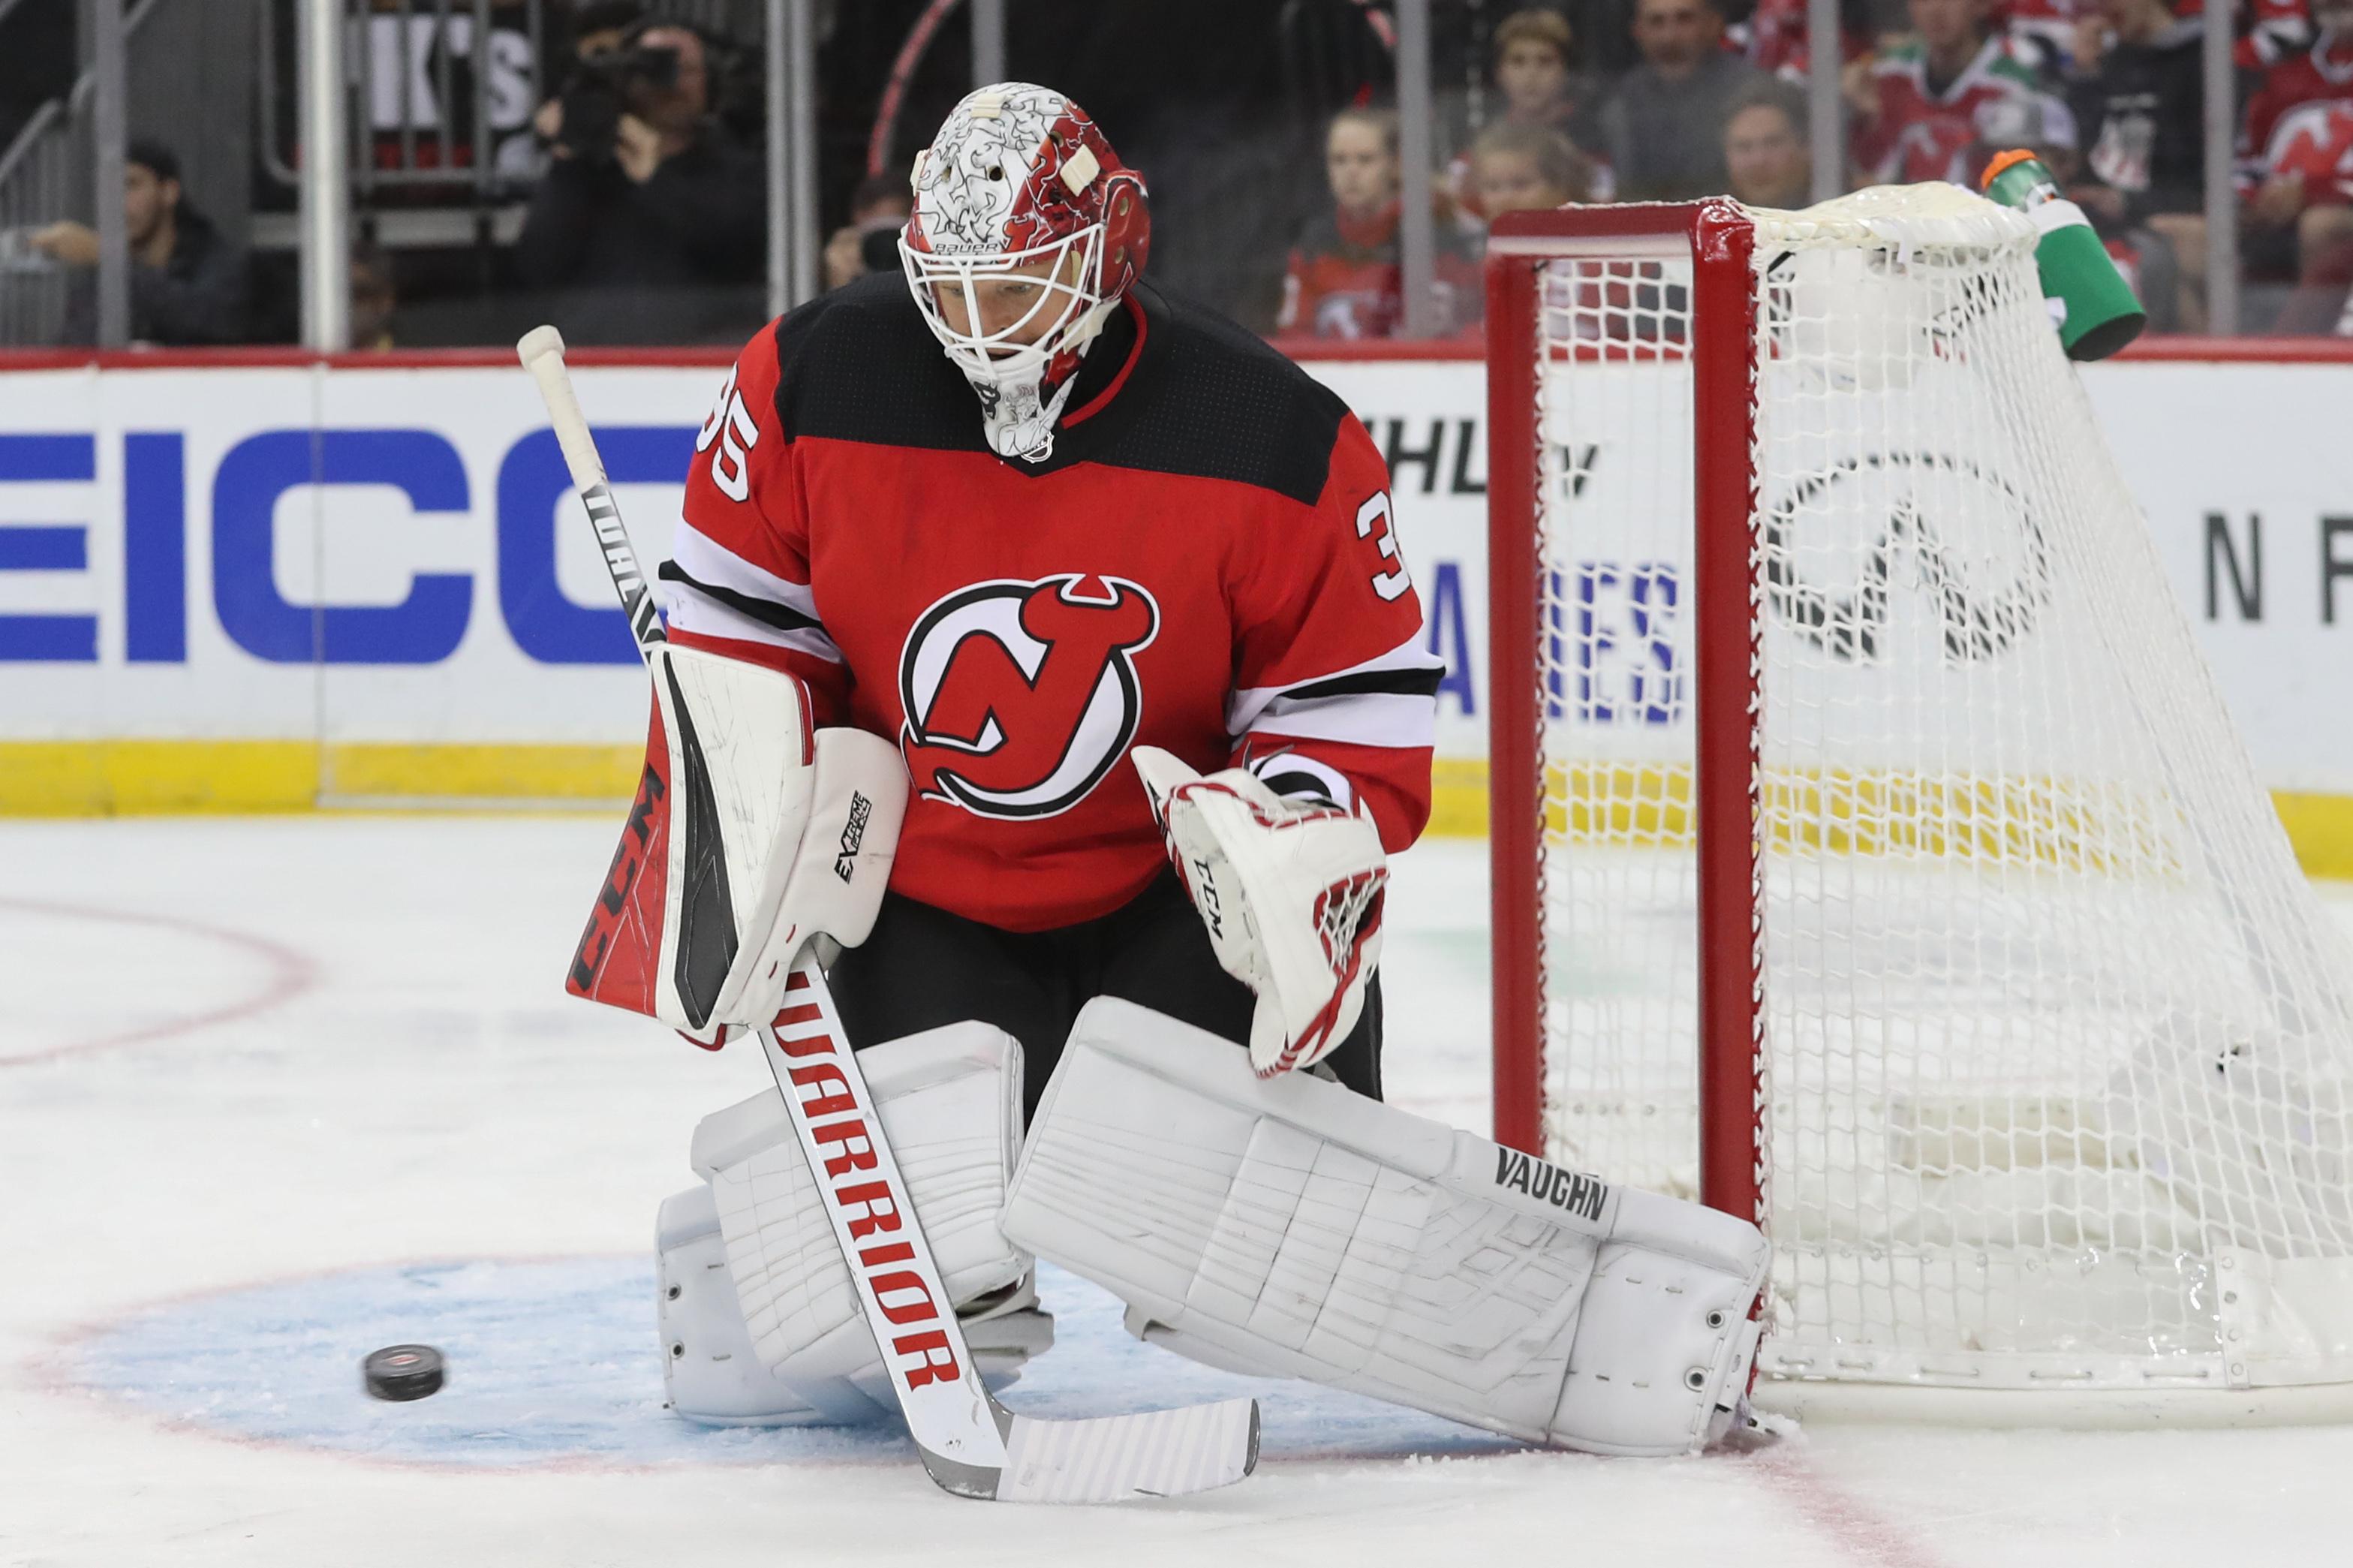 Oct 14, 2019; Newark, NJ, USA; New Jersey Devils goaltender Cory Schneider (35) makes a save during the first period of their game against the Florida Panthers at Prudential Center. Mandatory Credit: Ed Mulholland-USA TODAY Sports / © Ed Mulholland-USA TODAY Sports